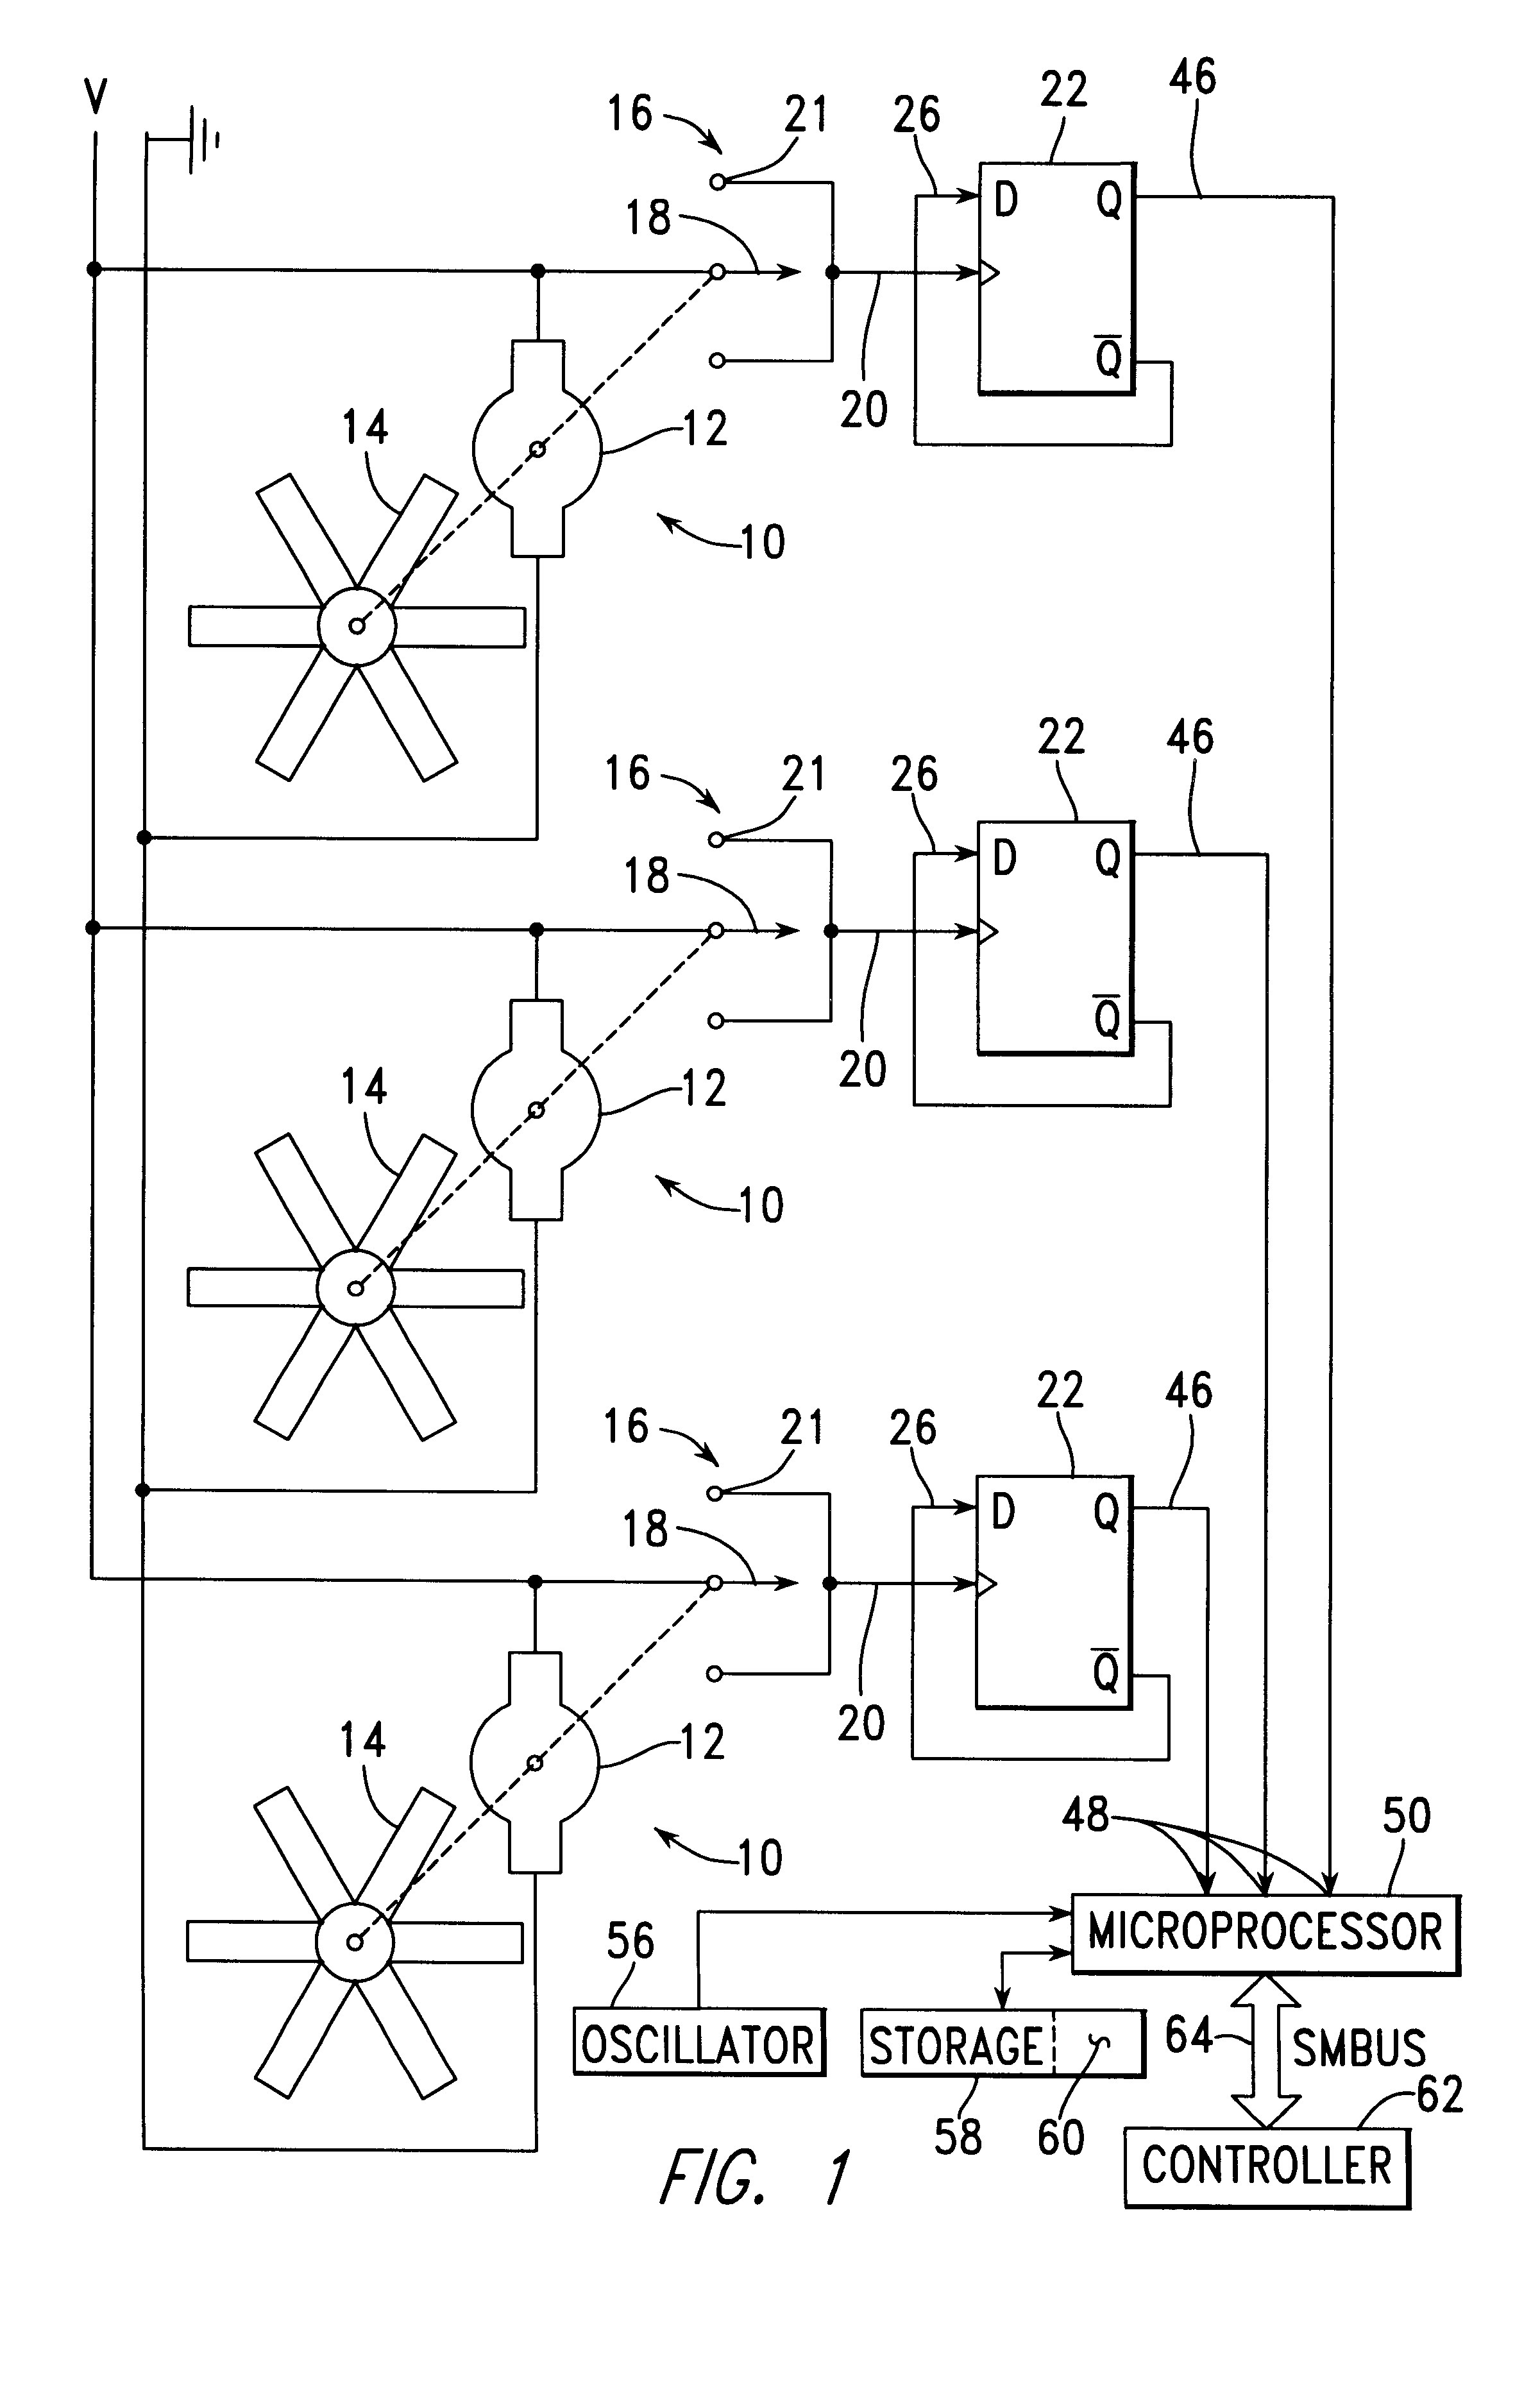 Apparatus and method for monitoring fan speeds within a computing system